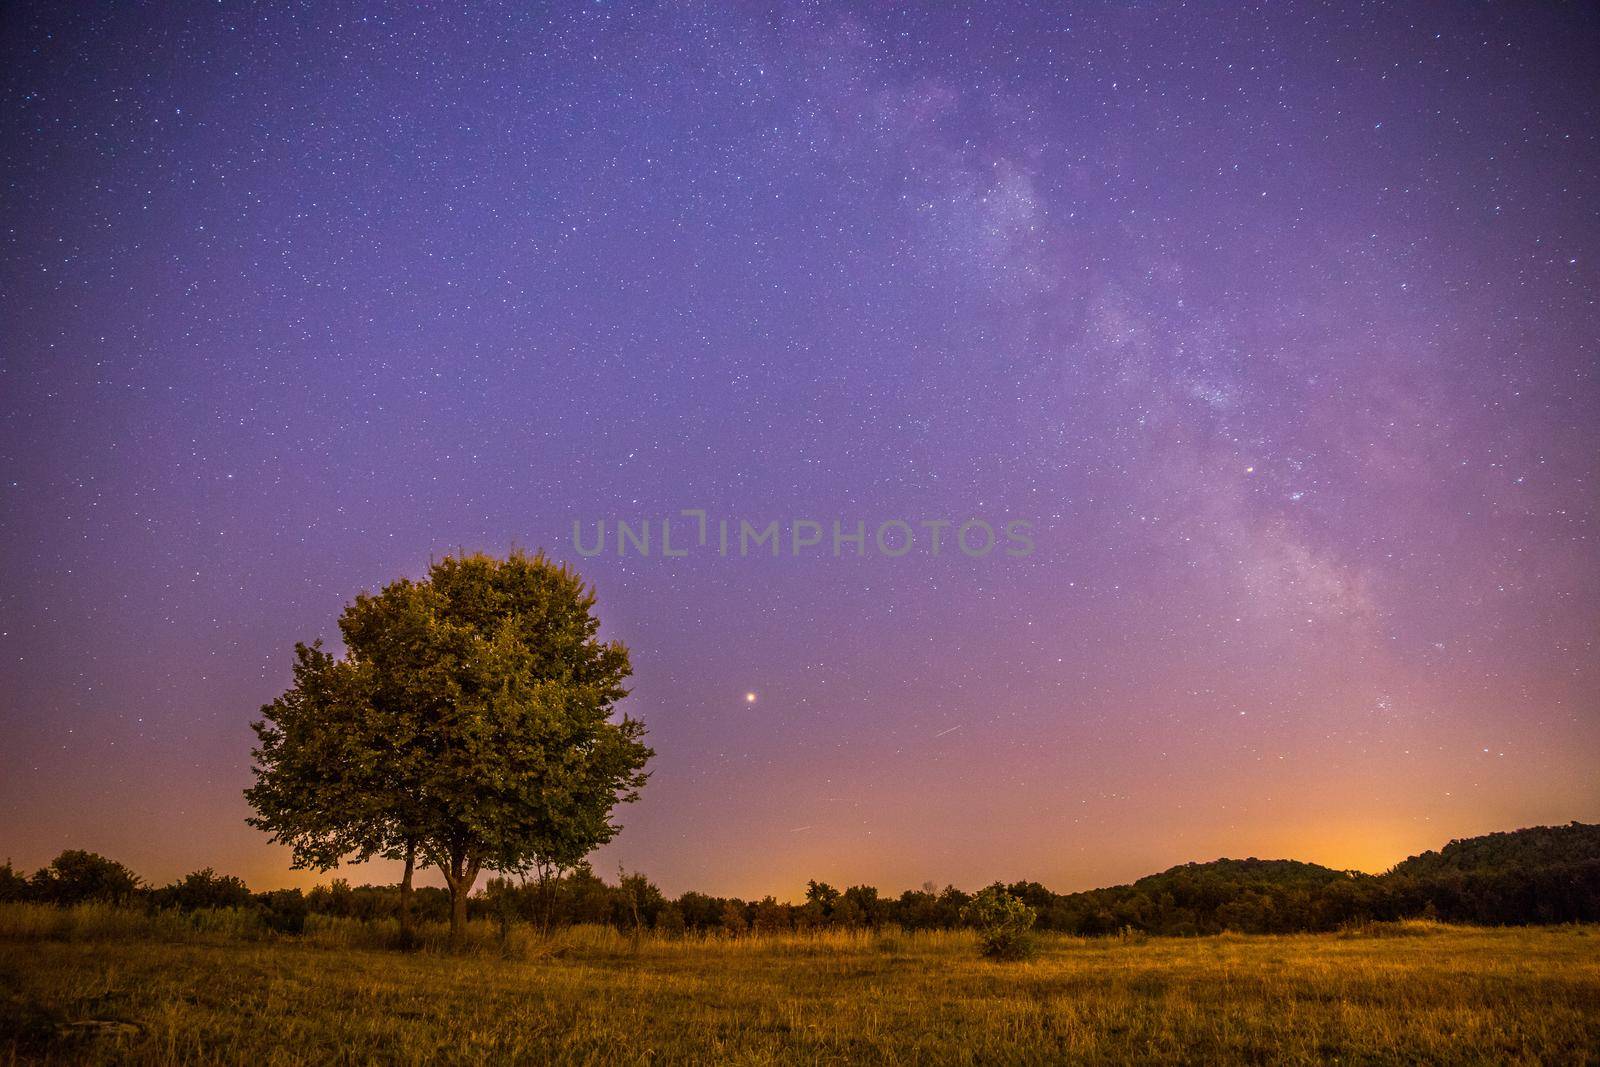 Night and stars Landscape: Clear Milky way at night, lonely field and tree by Daxenbichler